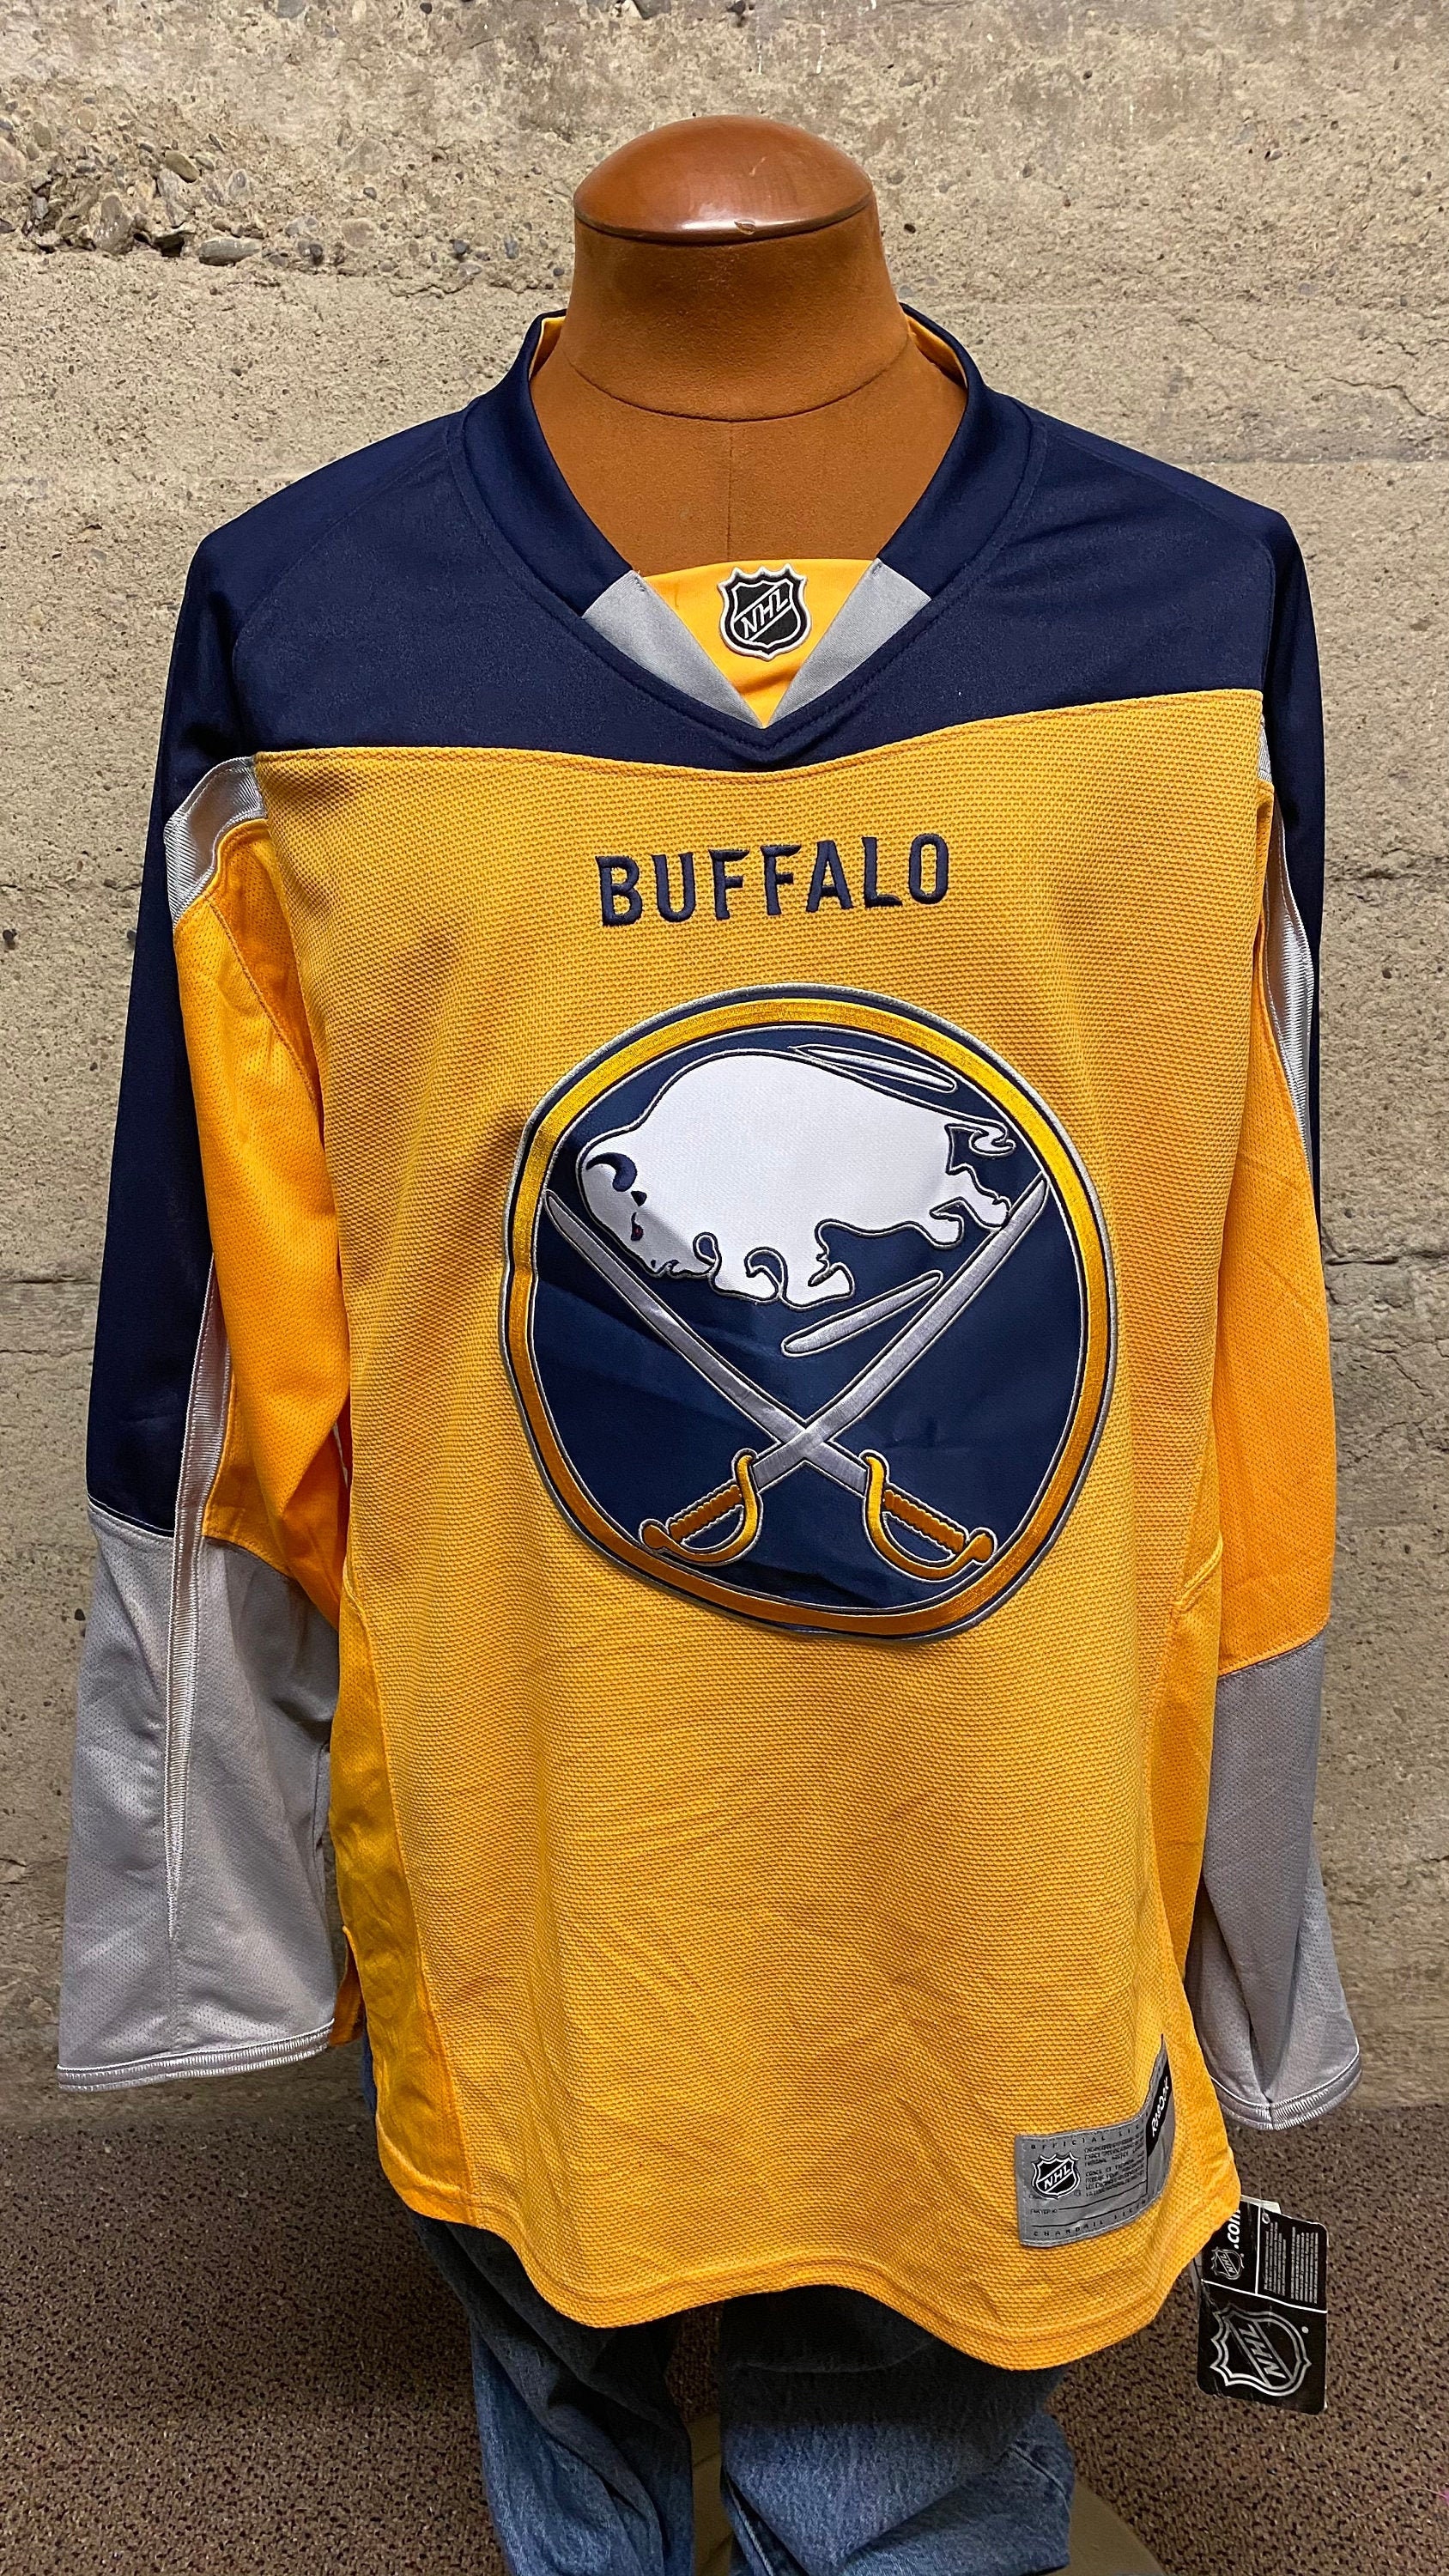 Ryan Miller Autographed Buffalo Sabres Authentic Reebok Pro Jersey